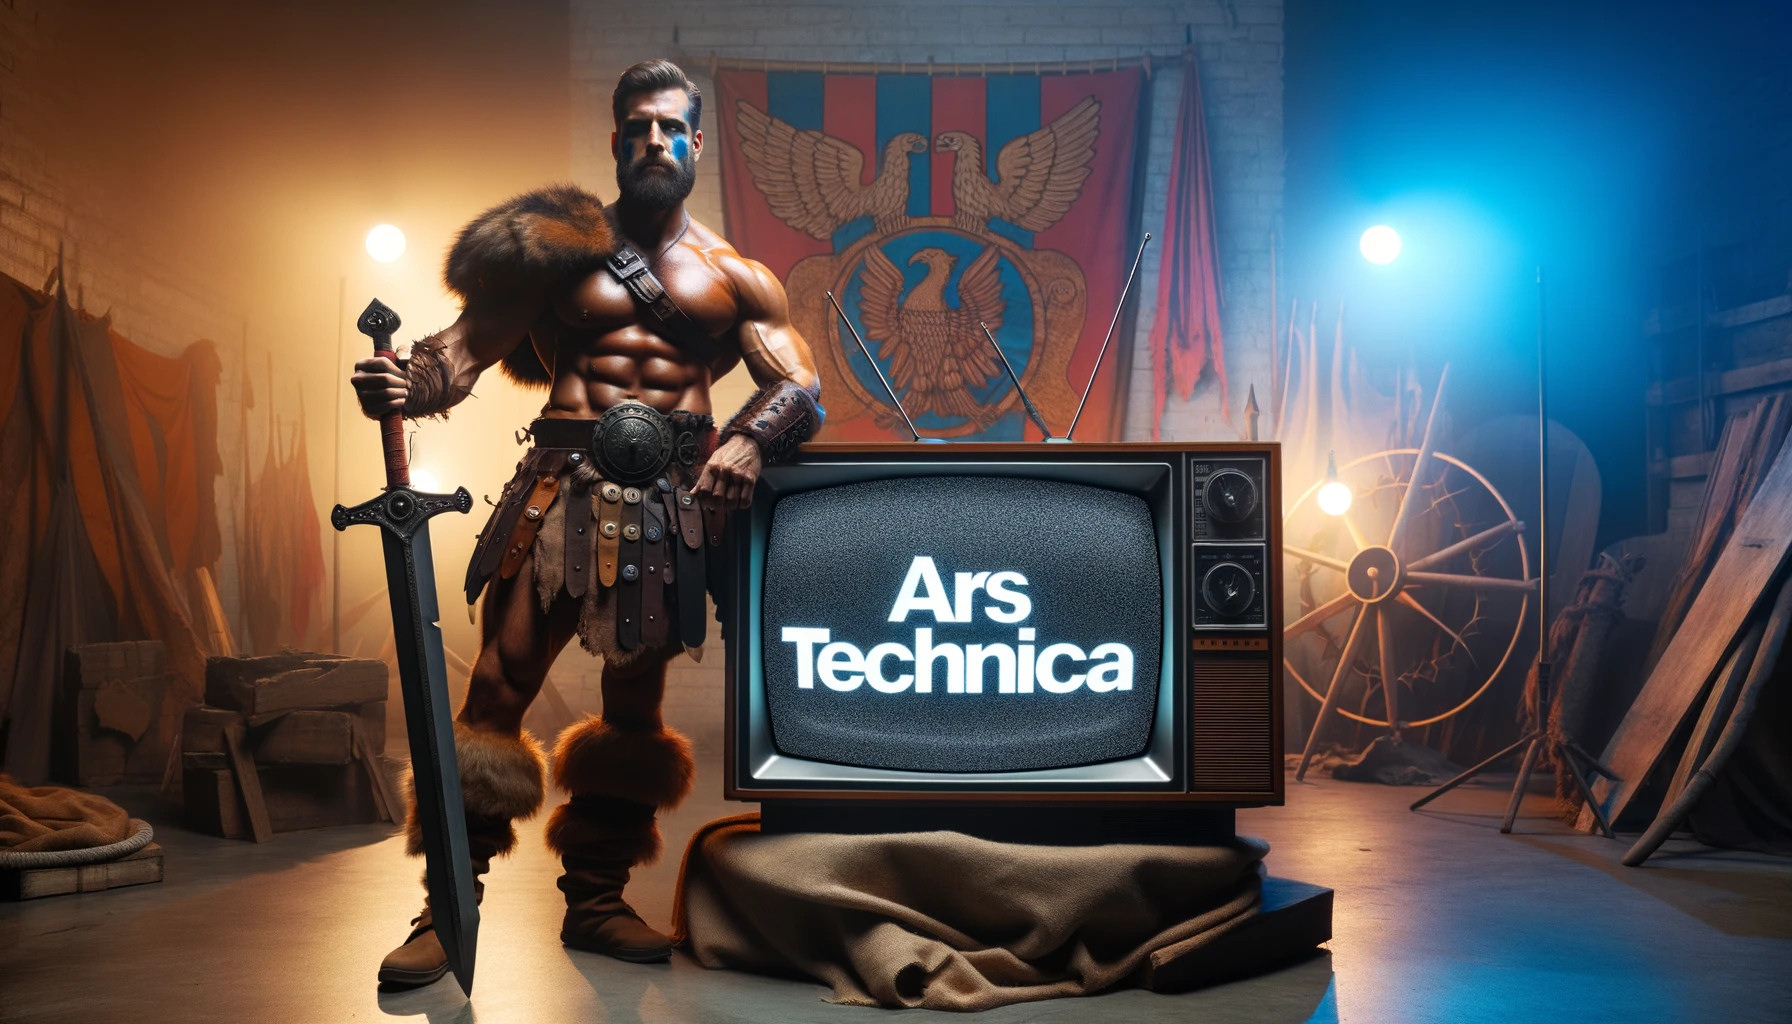 An example of DALL-E 3 rendering text: A muscular barbarian with weapons stands confidently beside a CRT television set displaying the text 'Ars Technica'. The scene is cinematic with 8K resolution and dramatic studio lighting.